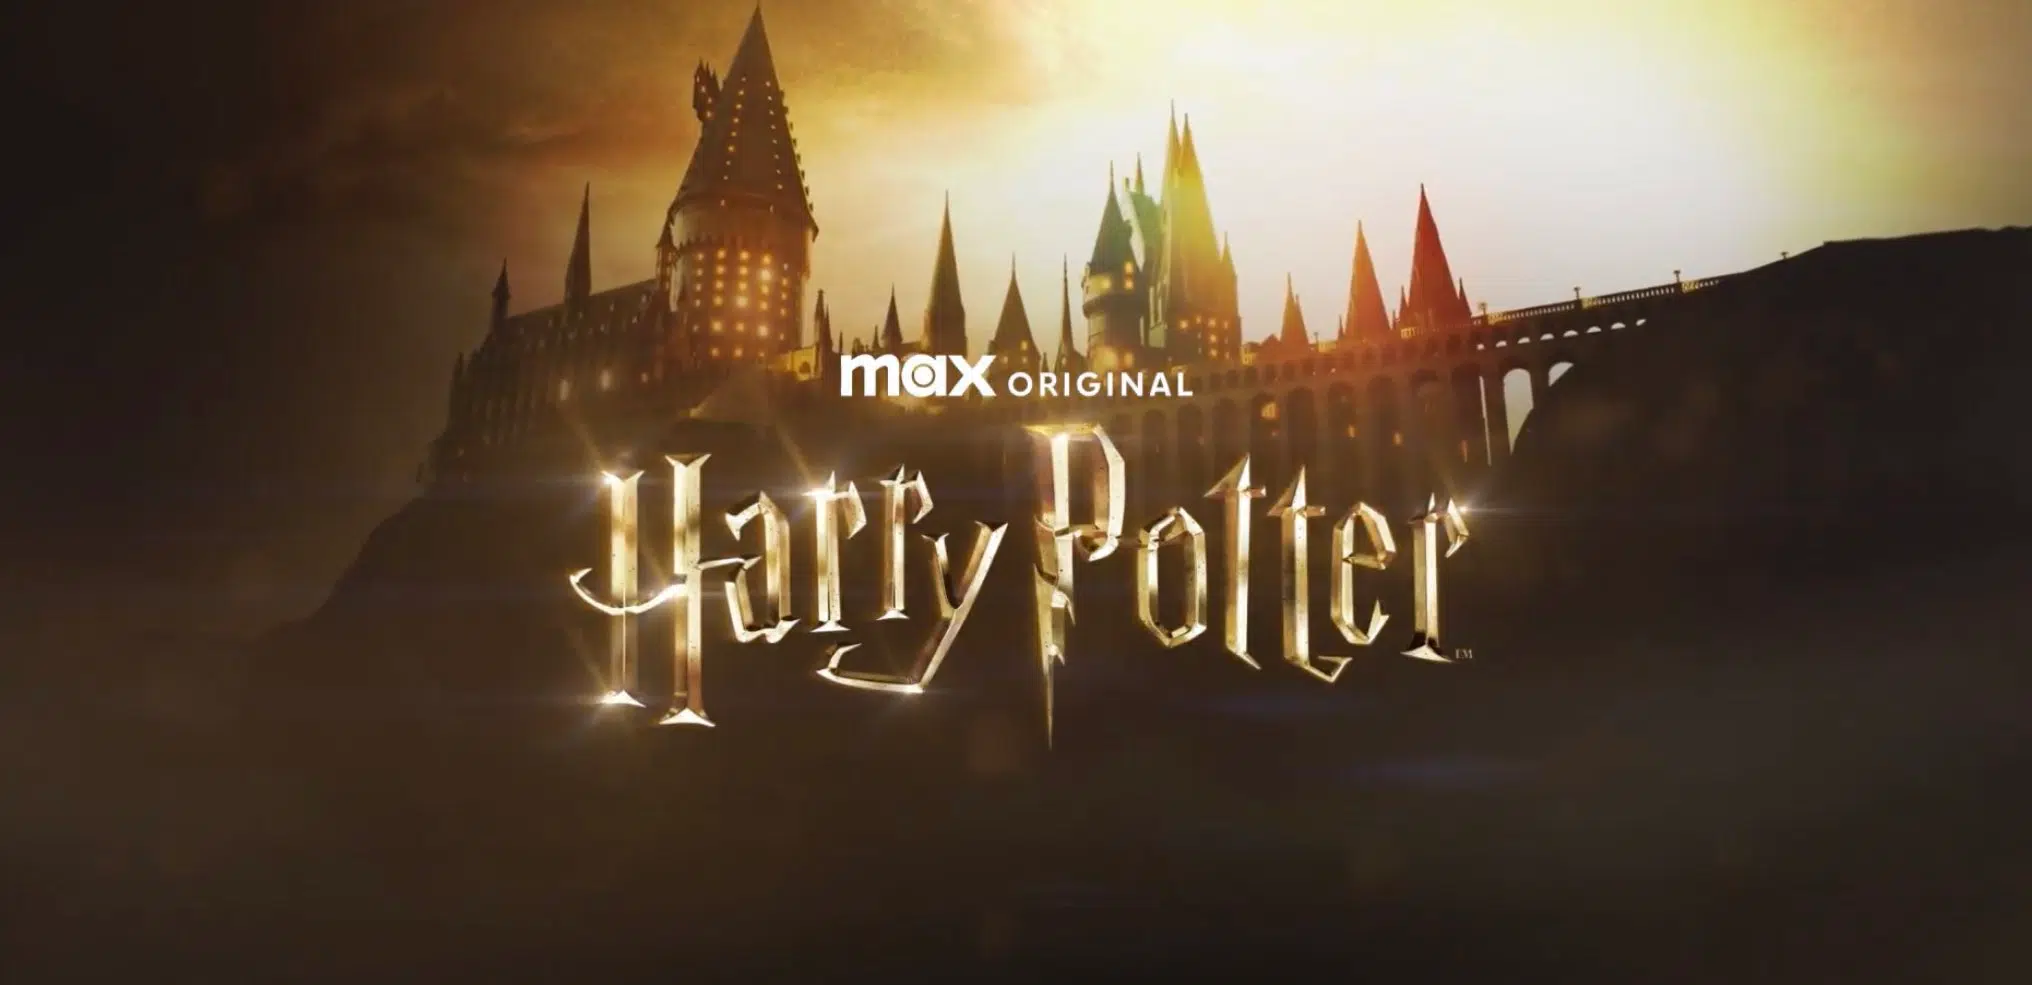 [WATCH] New Details About The Upcoming 'Harry Potter' Series